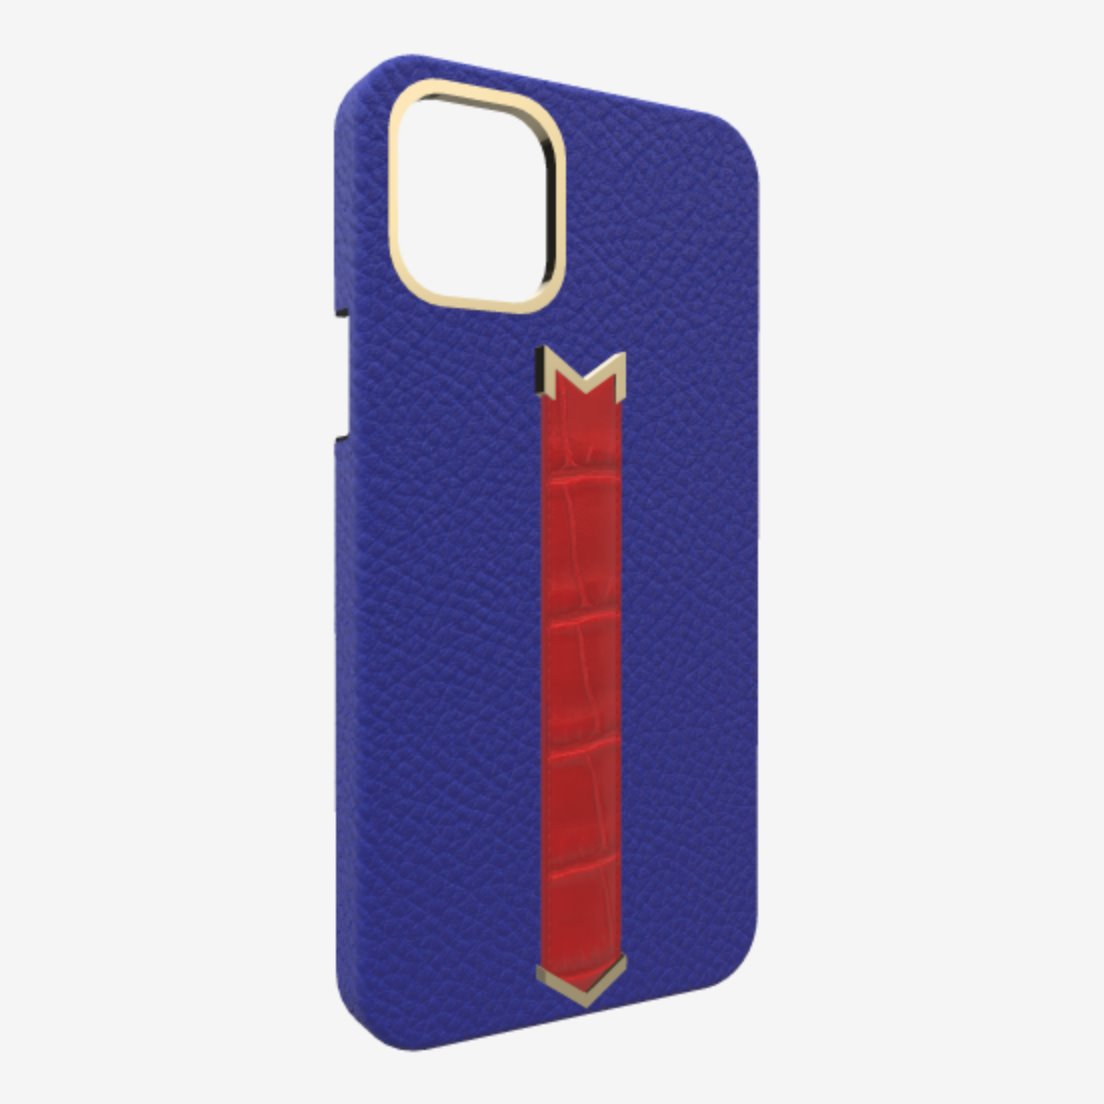 Gold Finger Strap Case for iPhone 13 Pro Max in Genuine Calfskin and Alligator Electric Blue Glamour Red 